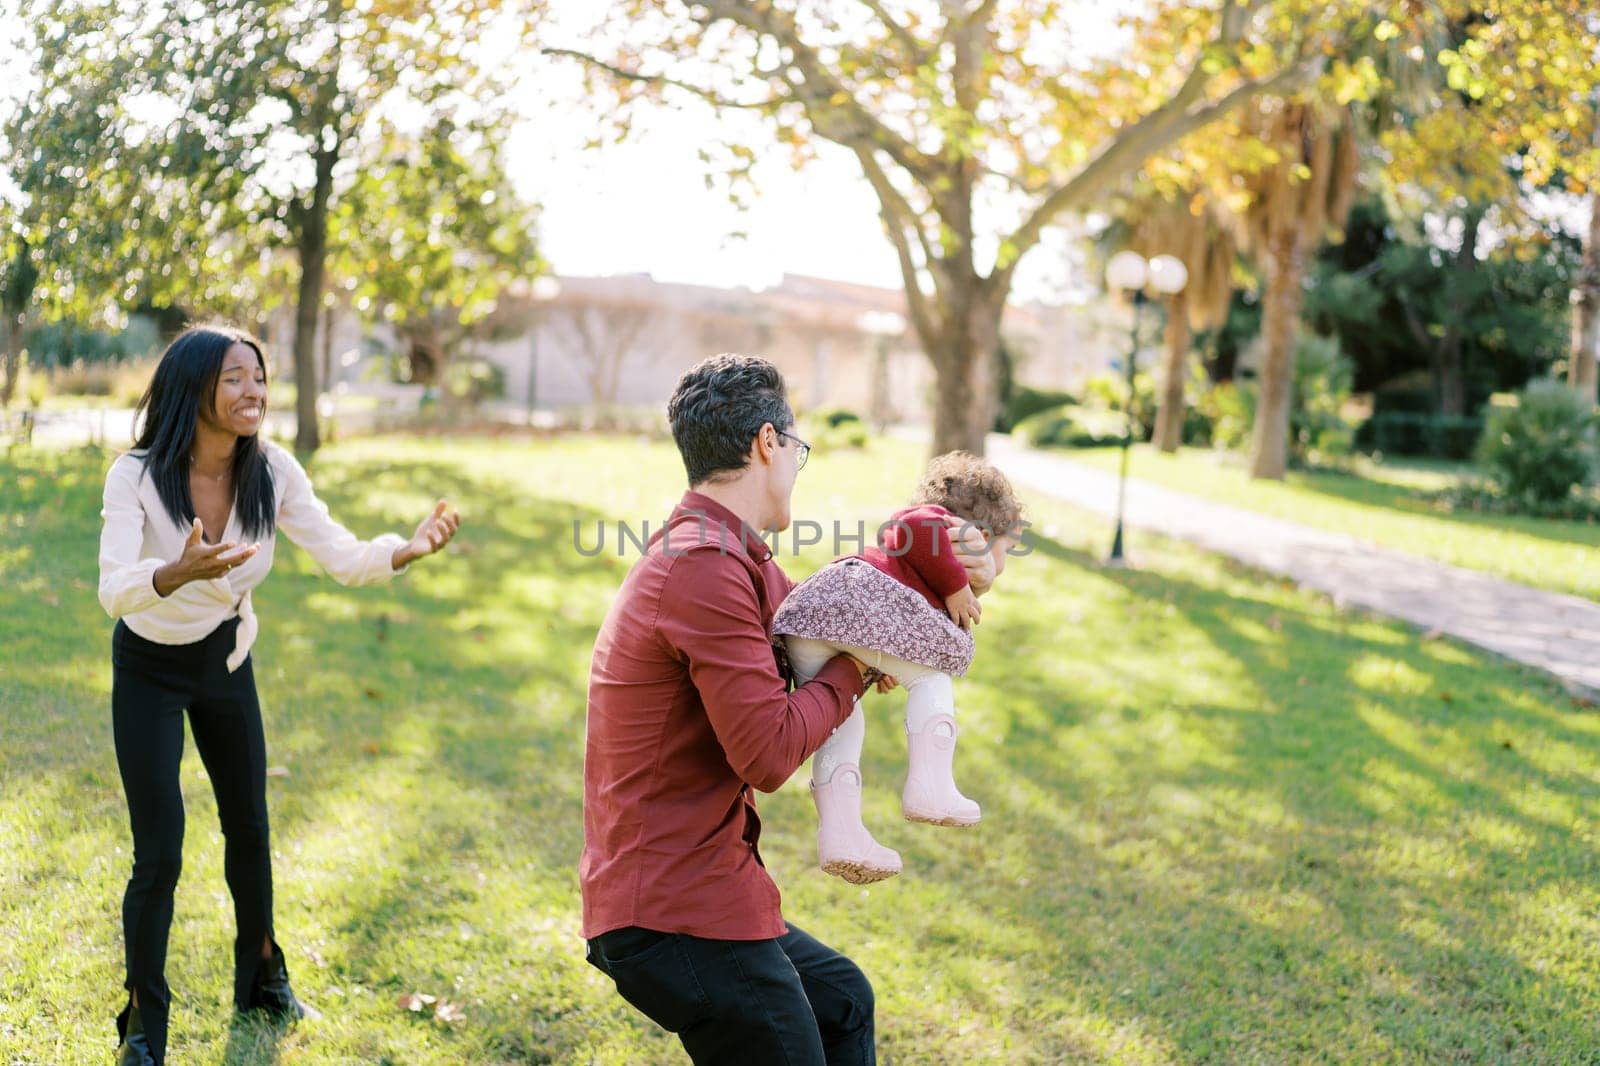 Laughing mom stretches her hands to the little girl who is circling dad in the park. High quality photo